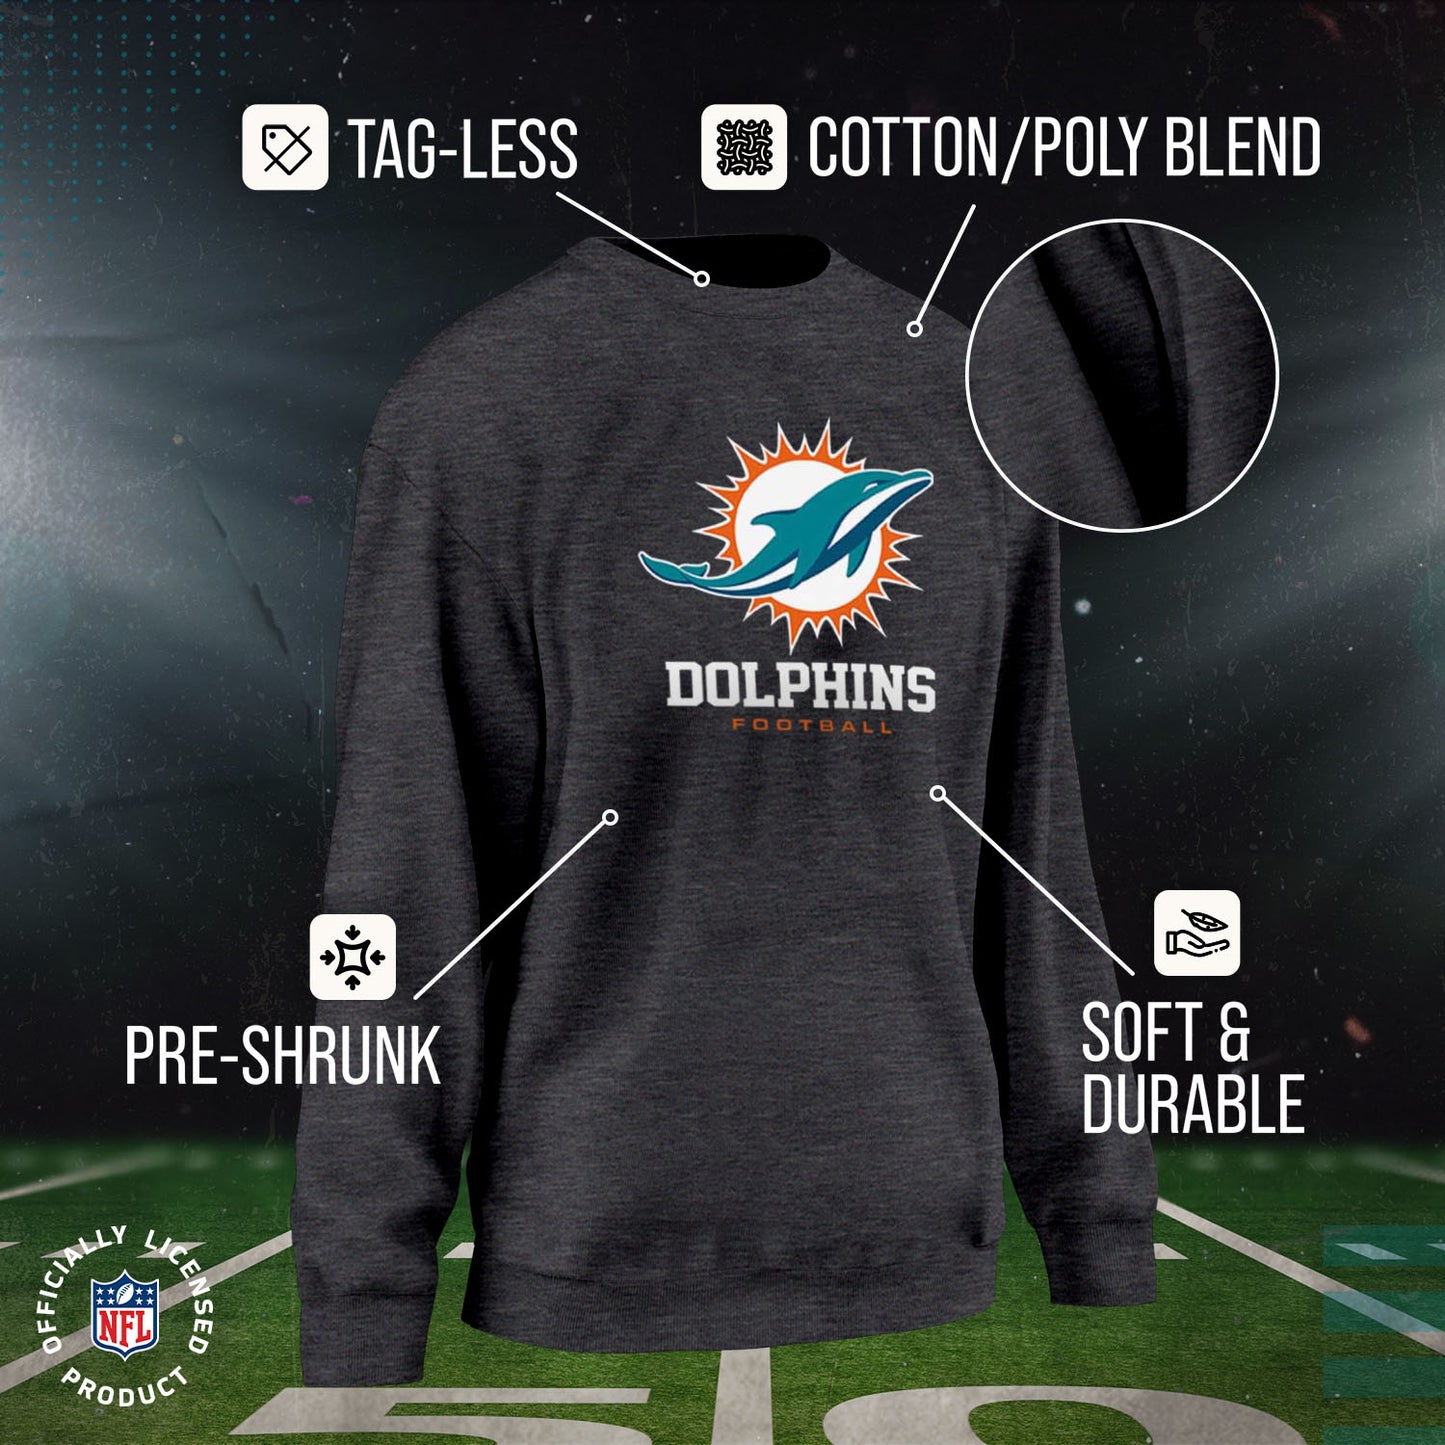 Miami Dolphins Women's NFL Ultimate Fan Logo Slouchy Crewneck -Tagless Fleece Lightweight Pullover - Charcoal